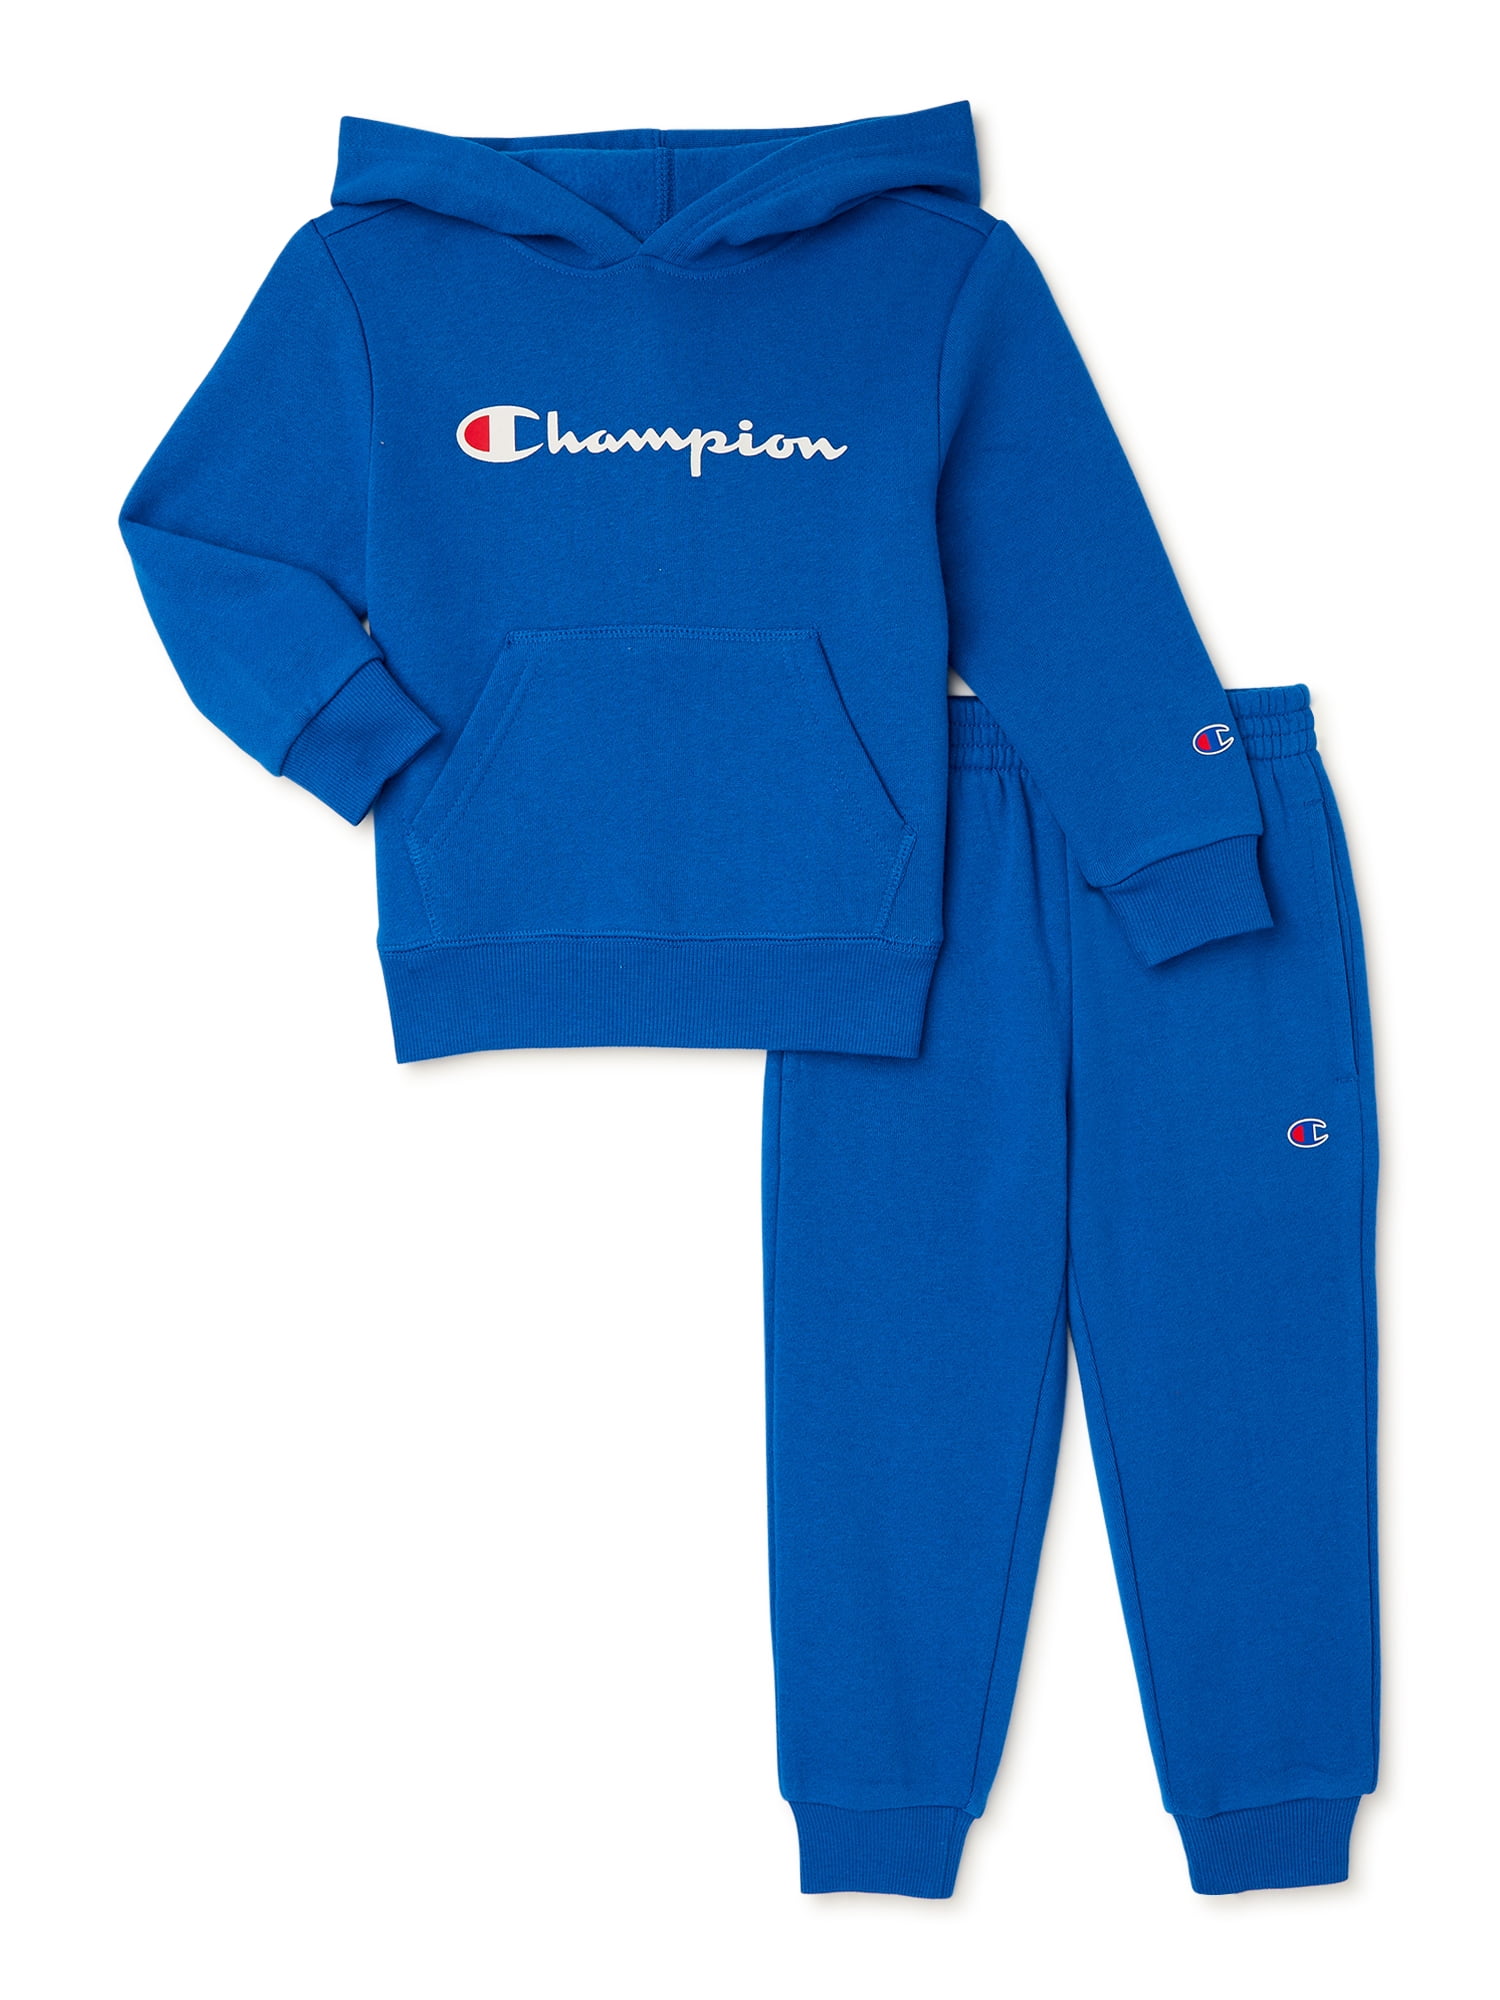 Toddler Boys\' Champion Matching 2T-4T Jogger and Set, Size Hoodie 2-Piece,